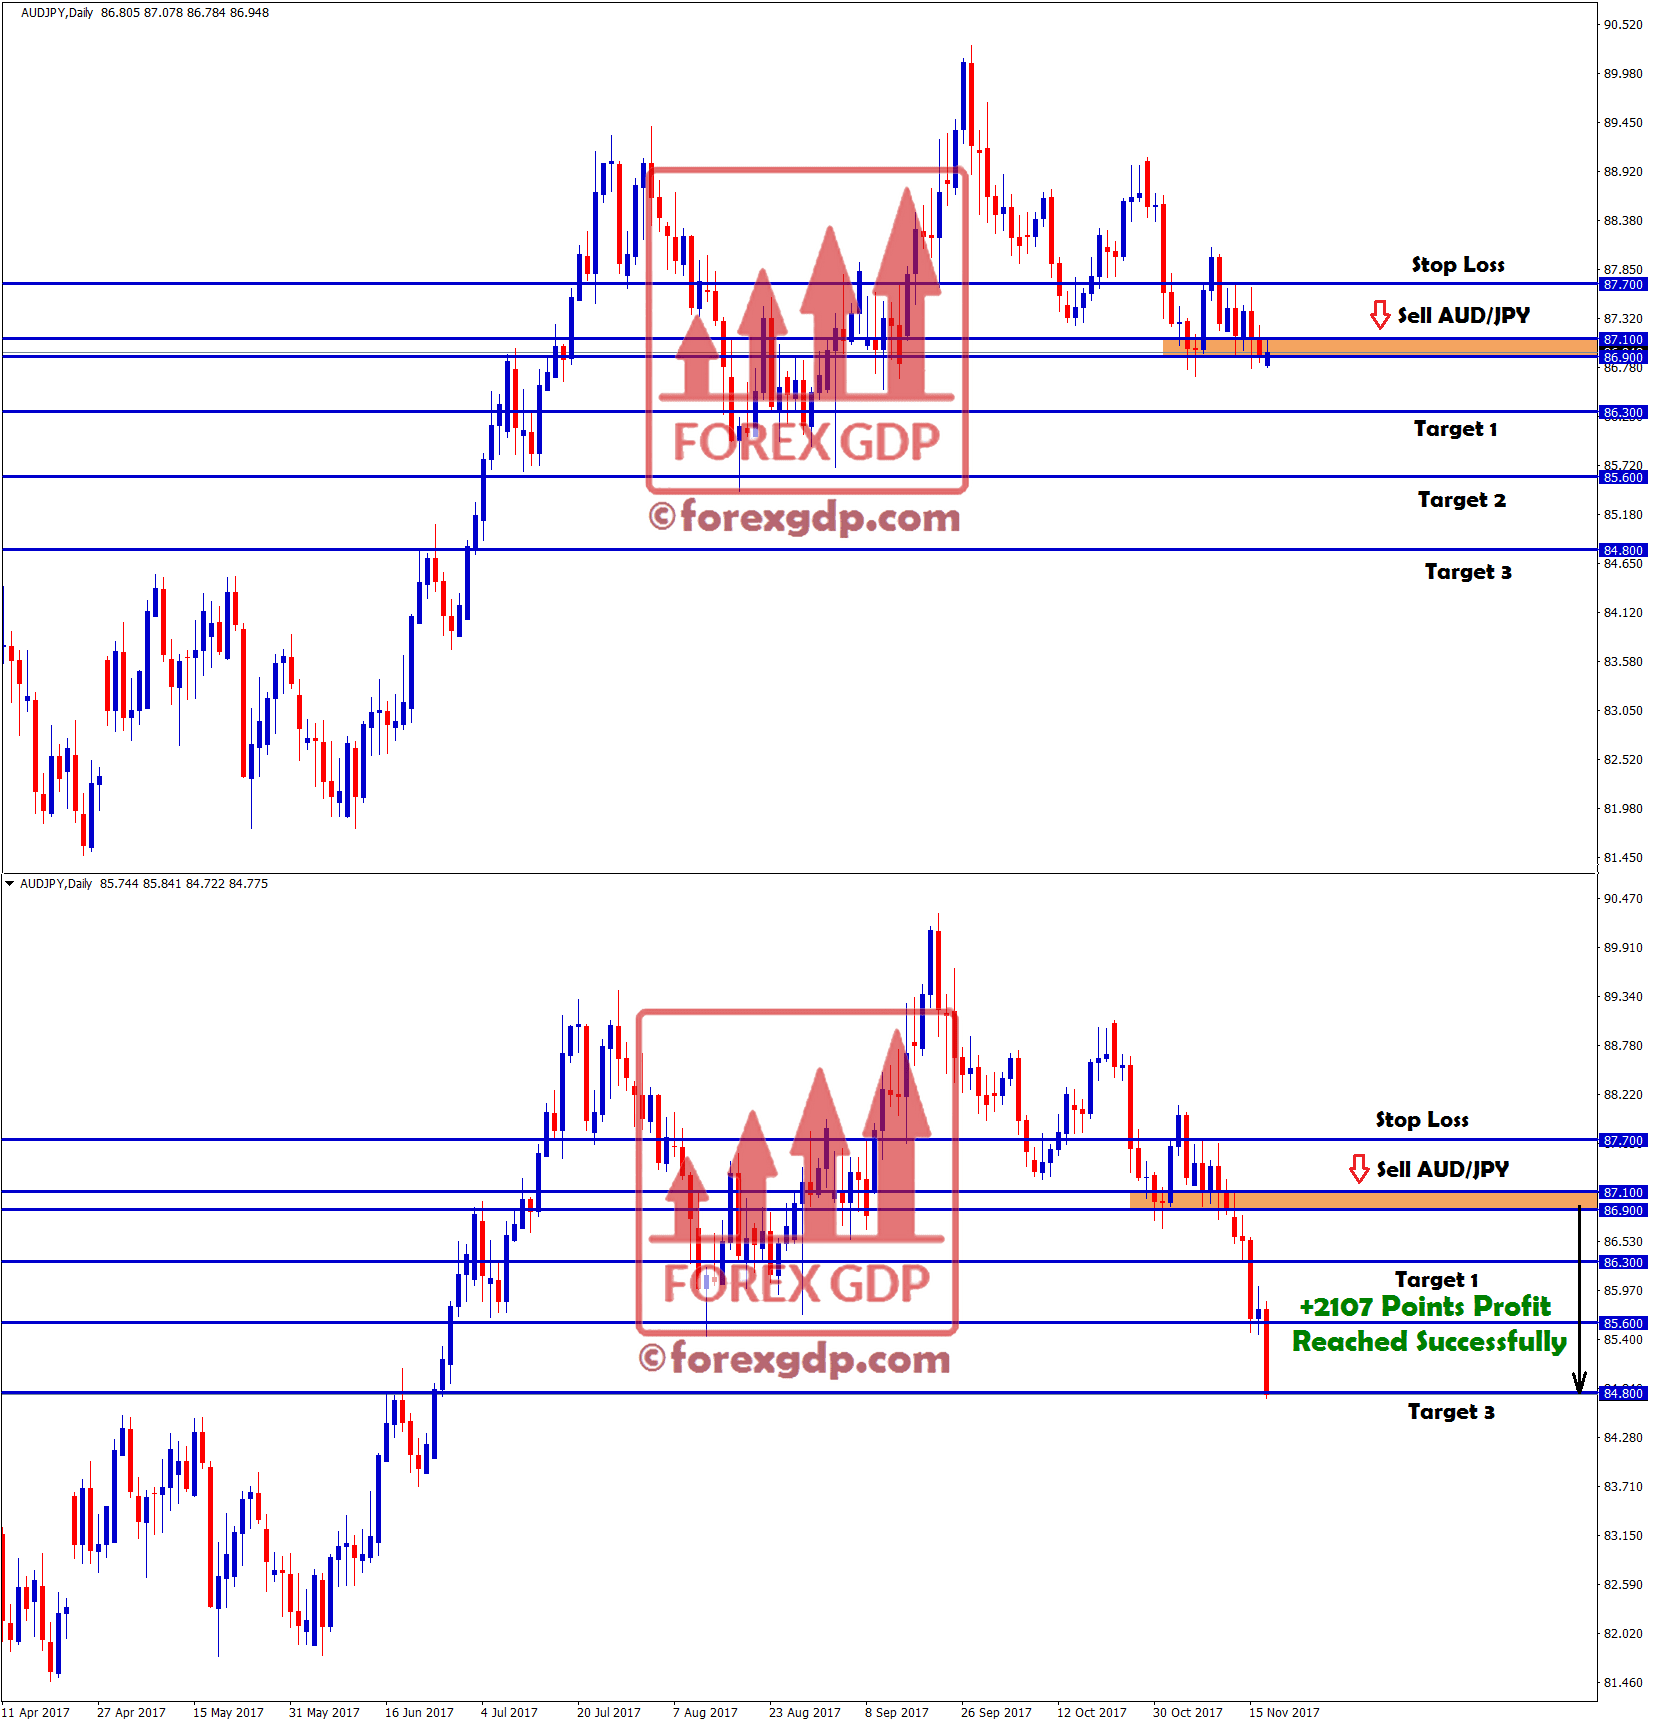 Sell AUDJPY trade with 3 tp